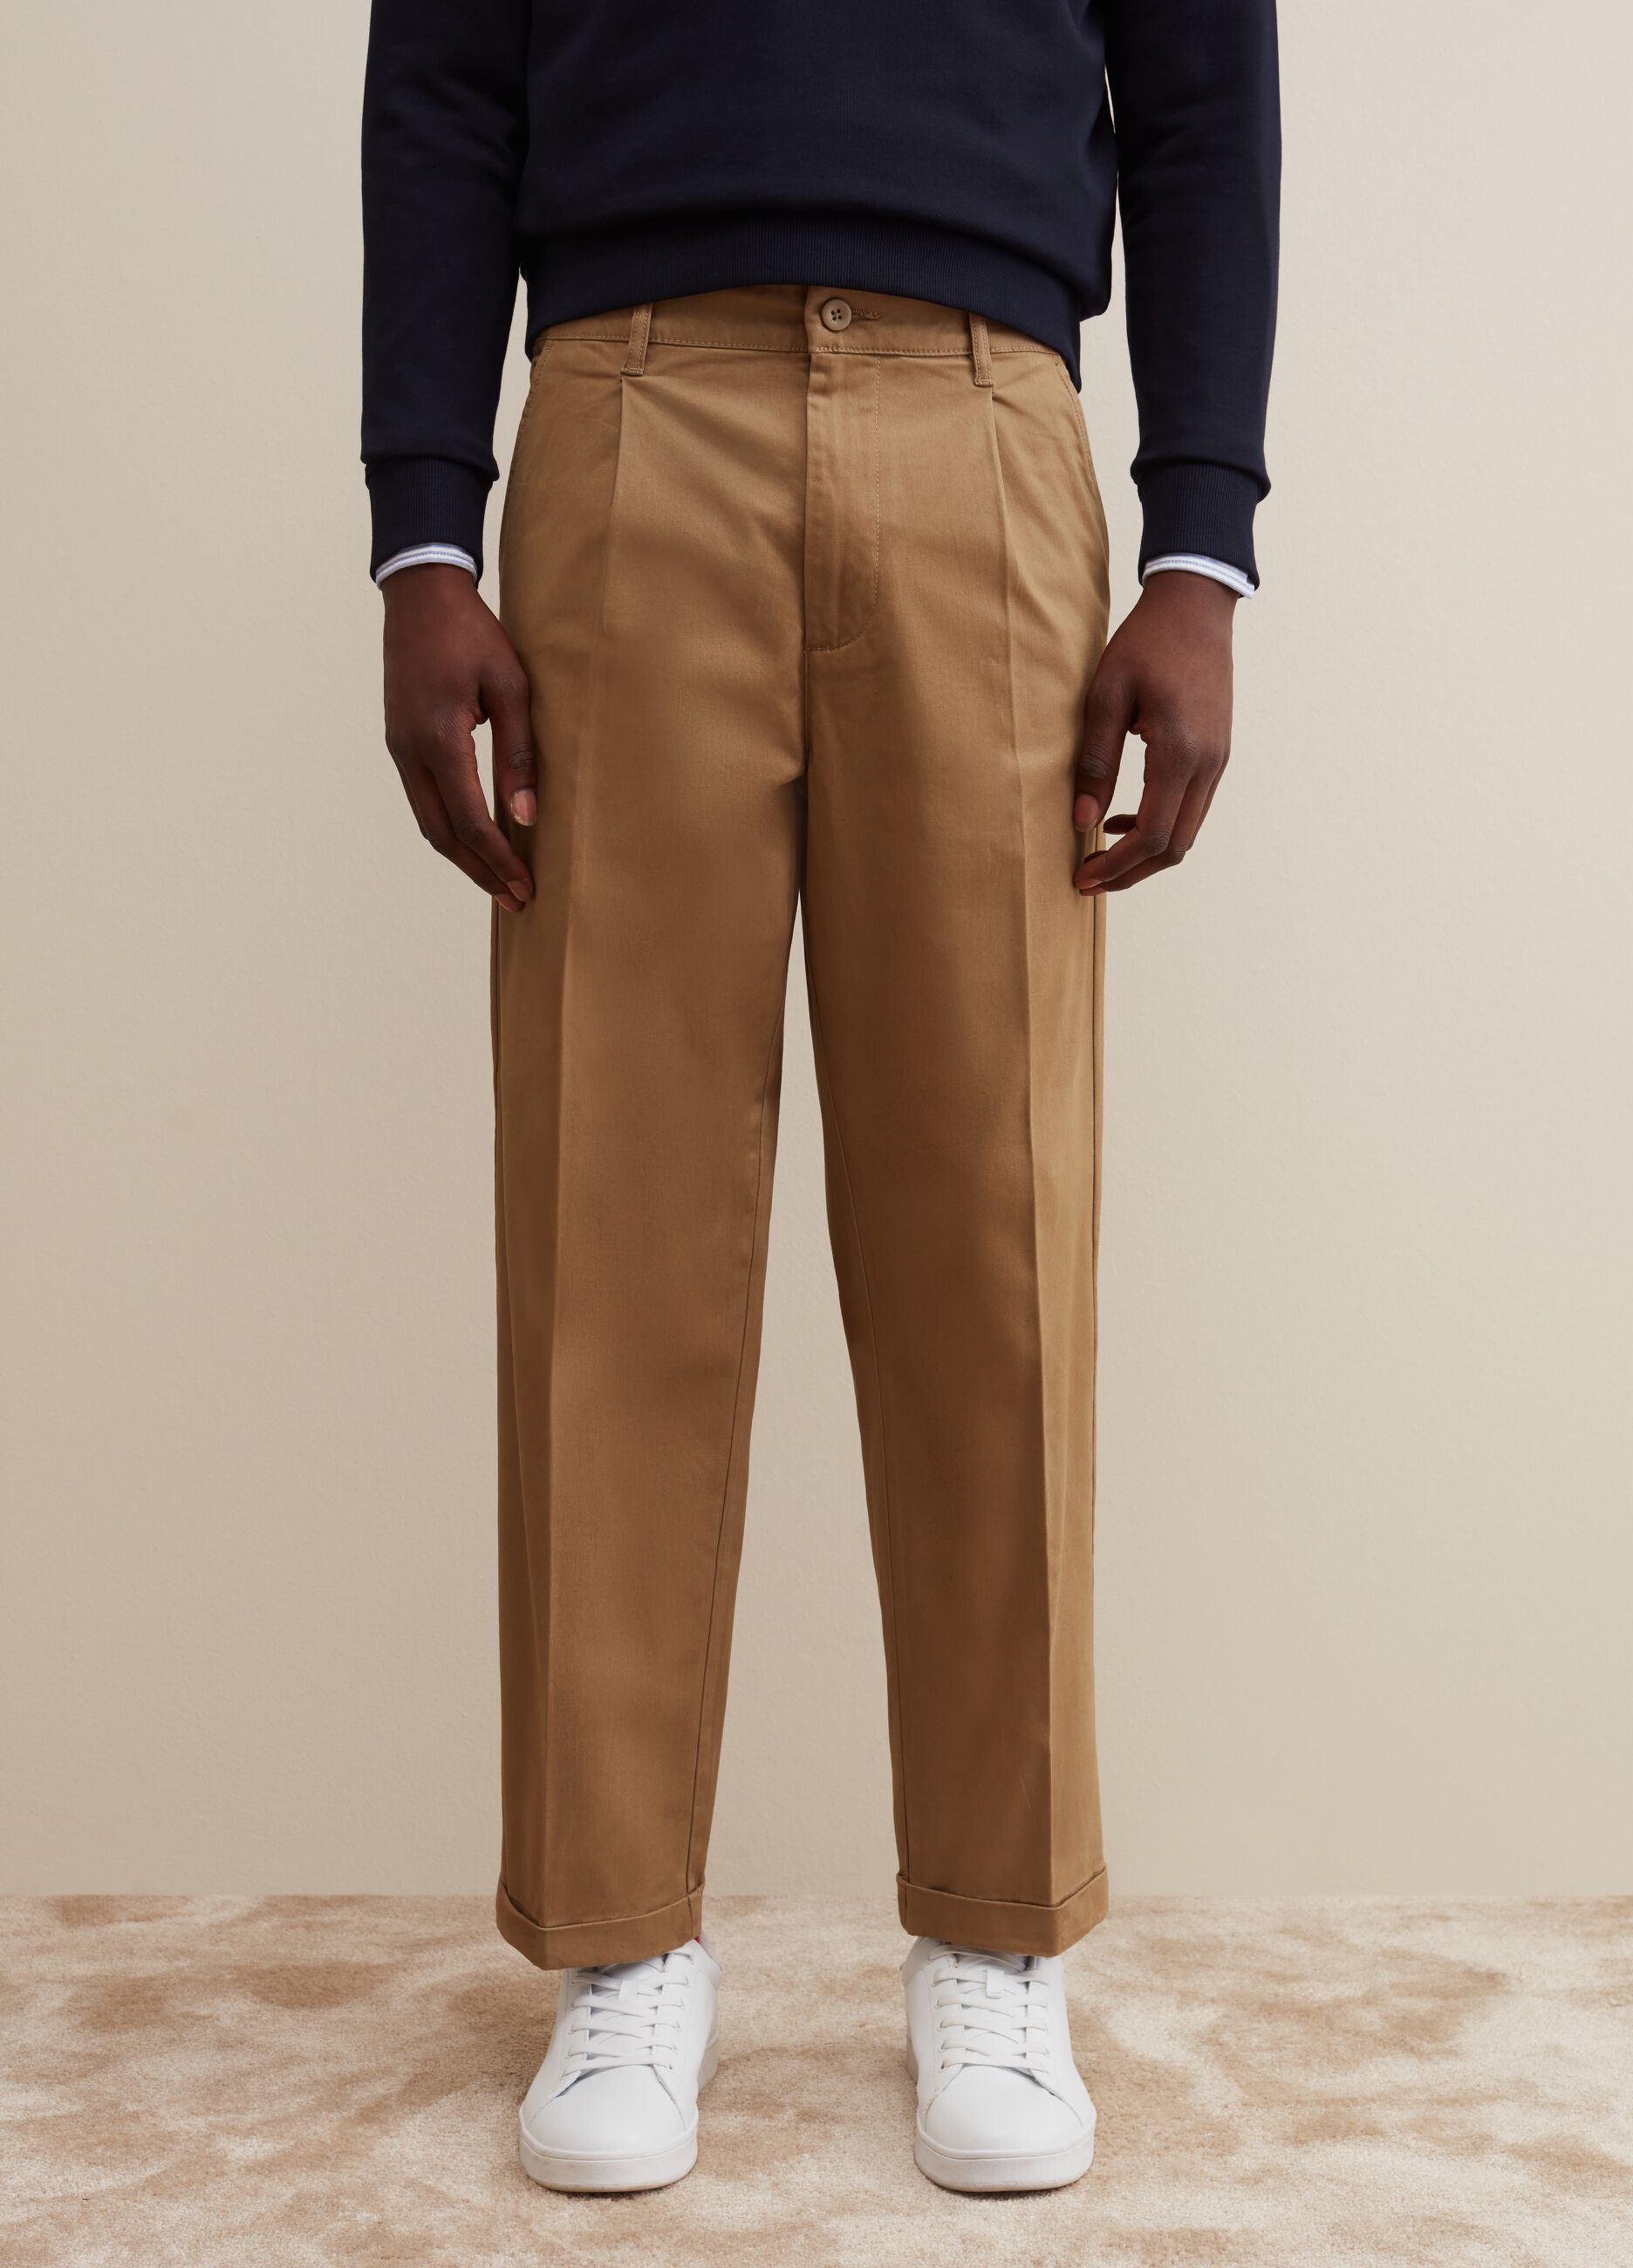 PIOMBO Man's Beige Chino trousers in twill with darts